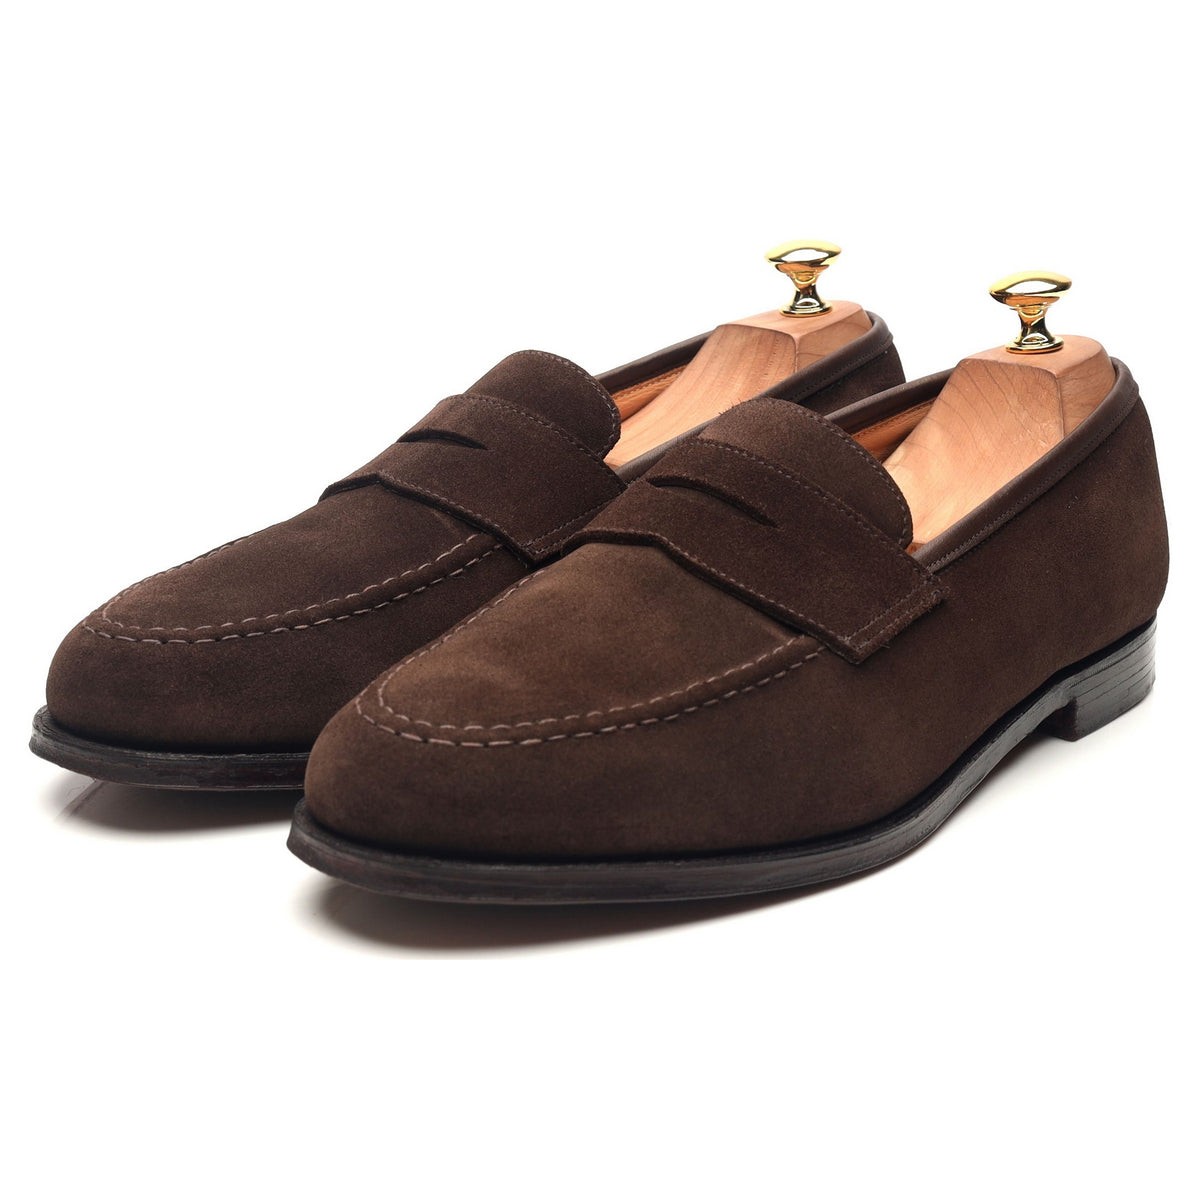 Boston shoes Boston Loafer Shoes for Men Latest (Tan) Loafers For Men - Buy Boston  shoes Boston Loafer Shoes for Men Latest (Tan) Loafers For Men Online at  Best Price - Shop